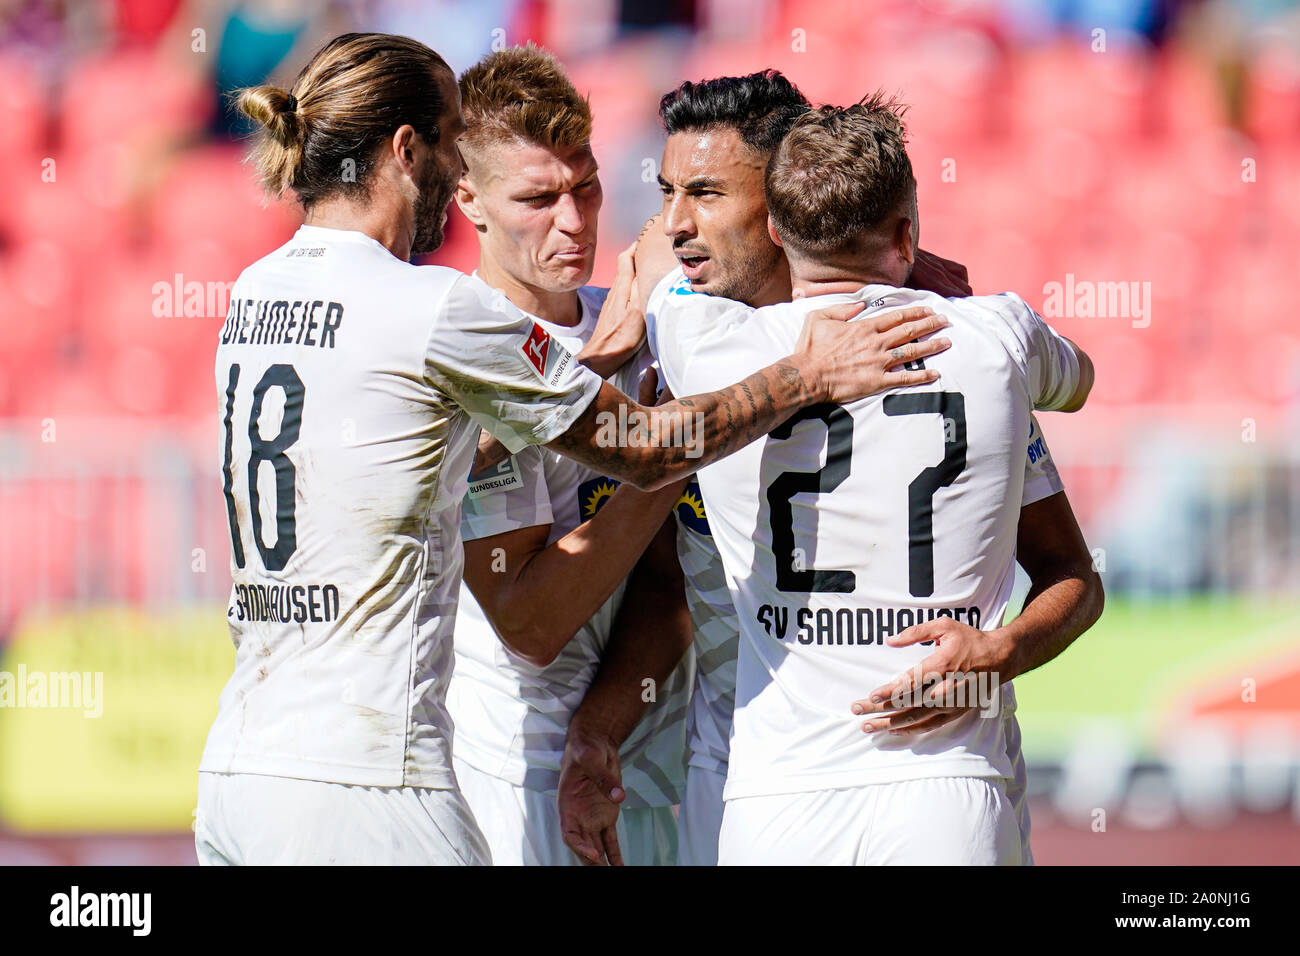 Sandhausen, Germany. 21st Sep, 2019. Soccer: 2nd Bundesliga, SV Sandhausen - VfL Bochum, 7th matchday, in Hardtwaldstadion. Sandhausens Aziz Bouhaddouz (2nd from right) cheers with his team-mates over the goal to 1:1. Credit: Uwe Anspach/dpa - IMPORTANT NOTE: In accordance with the requirements of the DFL Deutsche Fußball Liga or the DFB Deutscher Fußball-Bund, it is prohibited to use or have used photographs taken in the stadium and/or the match in the form of sequence images and/or video-like photo sequences./dpa/Alamy Live News Stock Photo